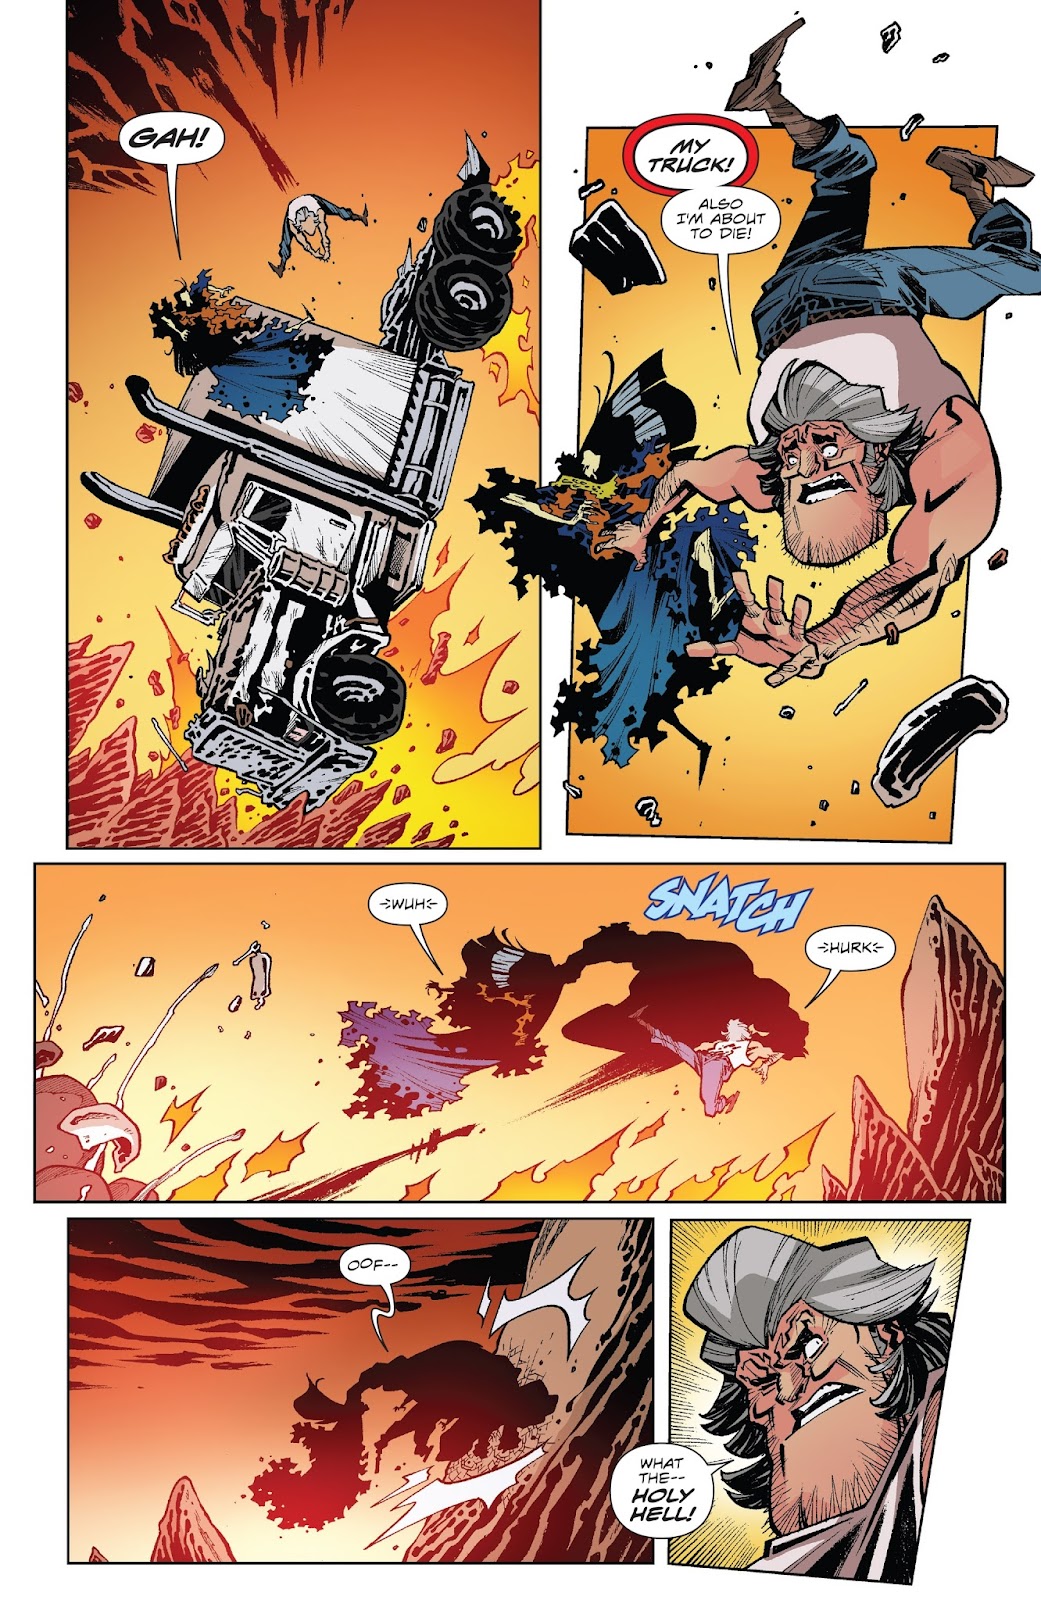 Big Trouble in Little China: Old Man Jack issue 4 - Page 5